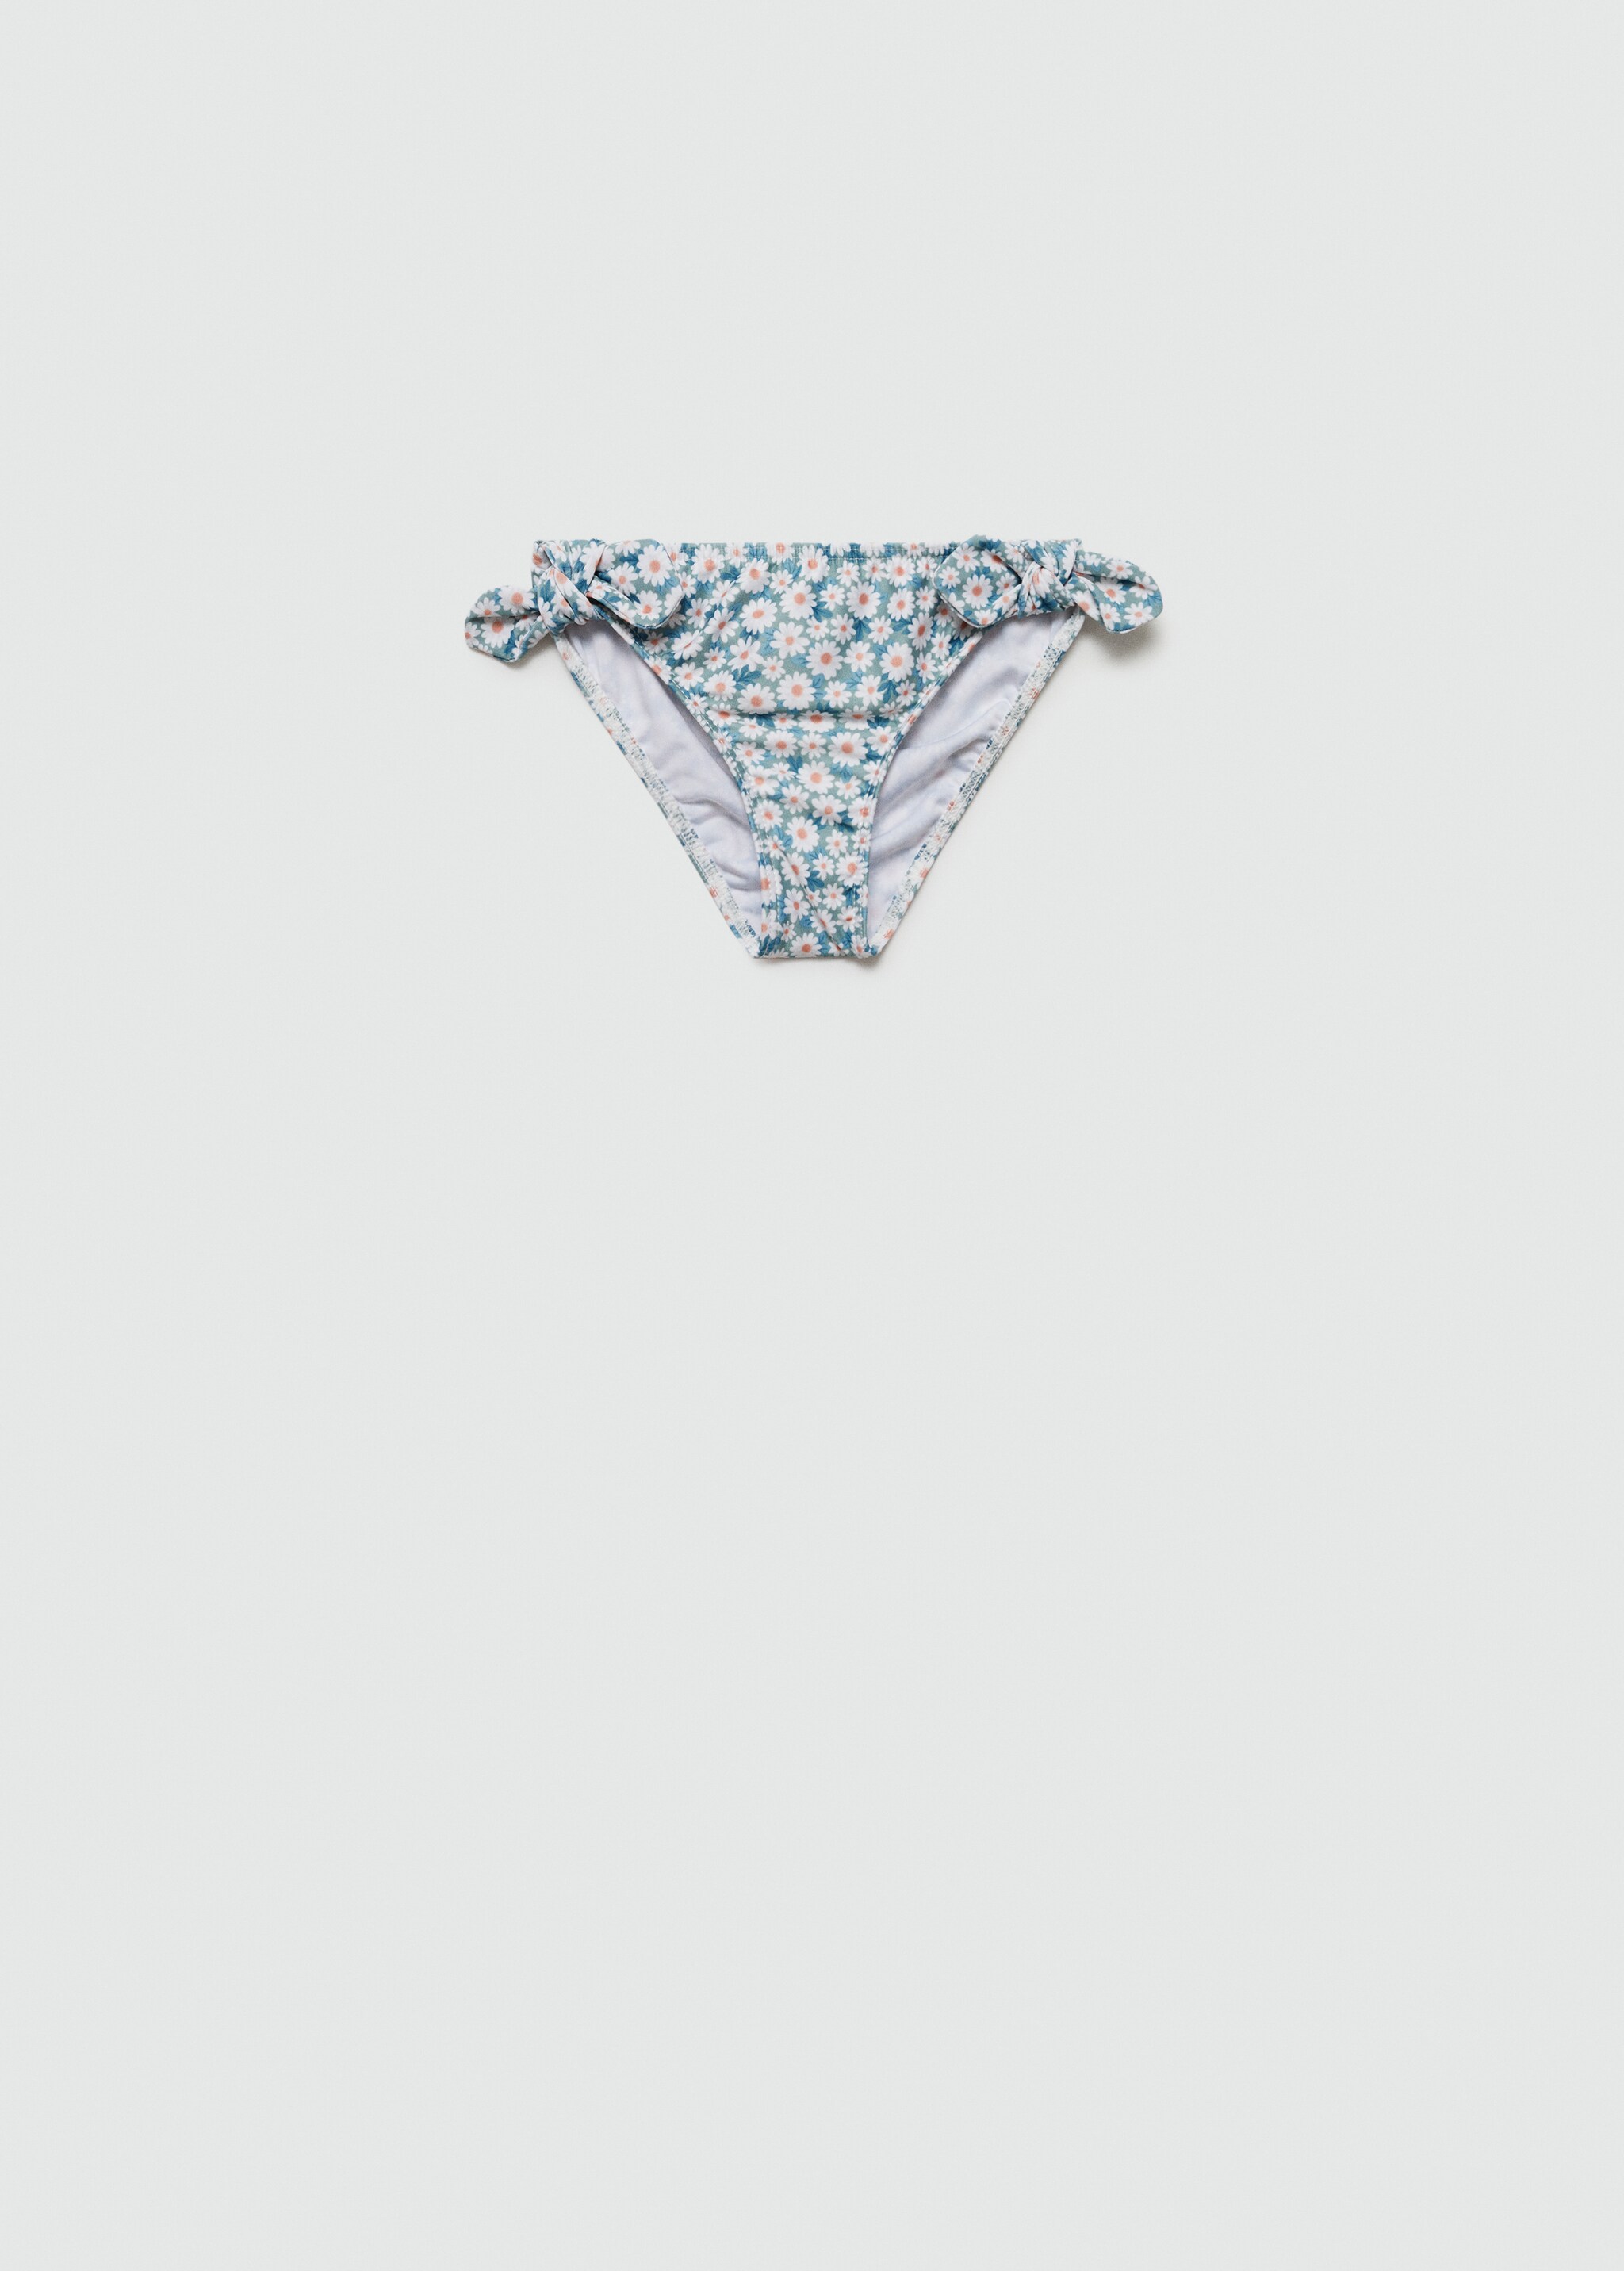 Floral bikini bottom - Article without model